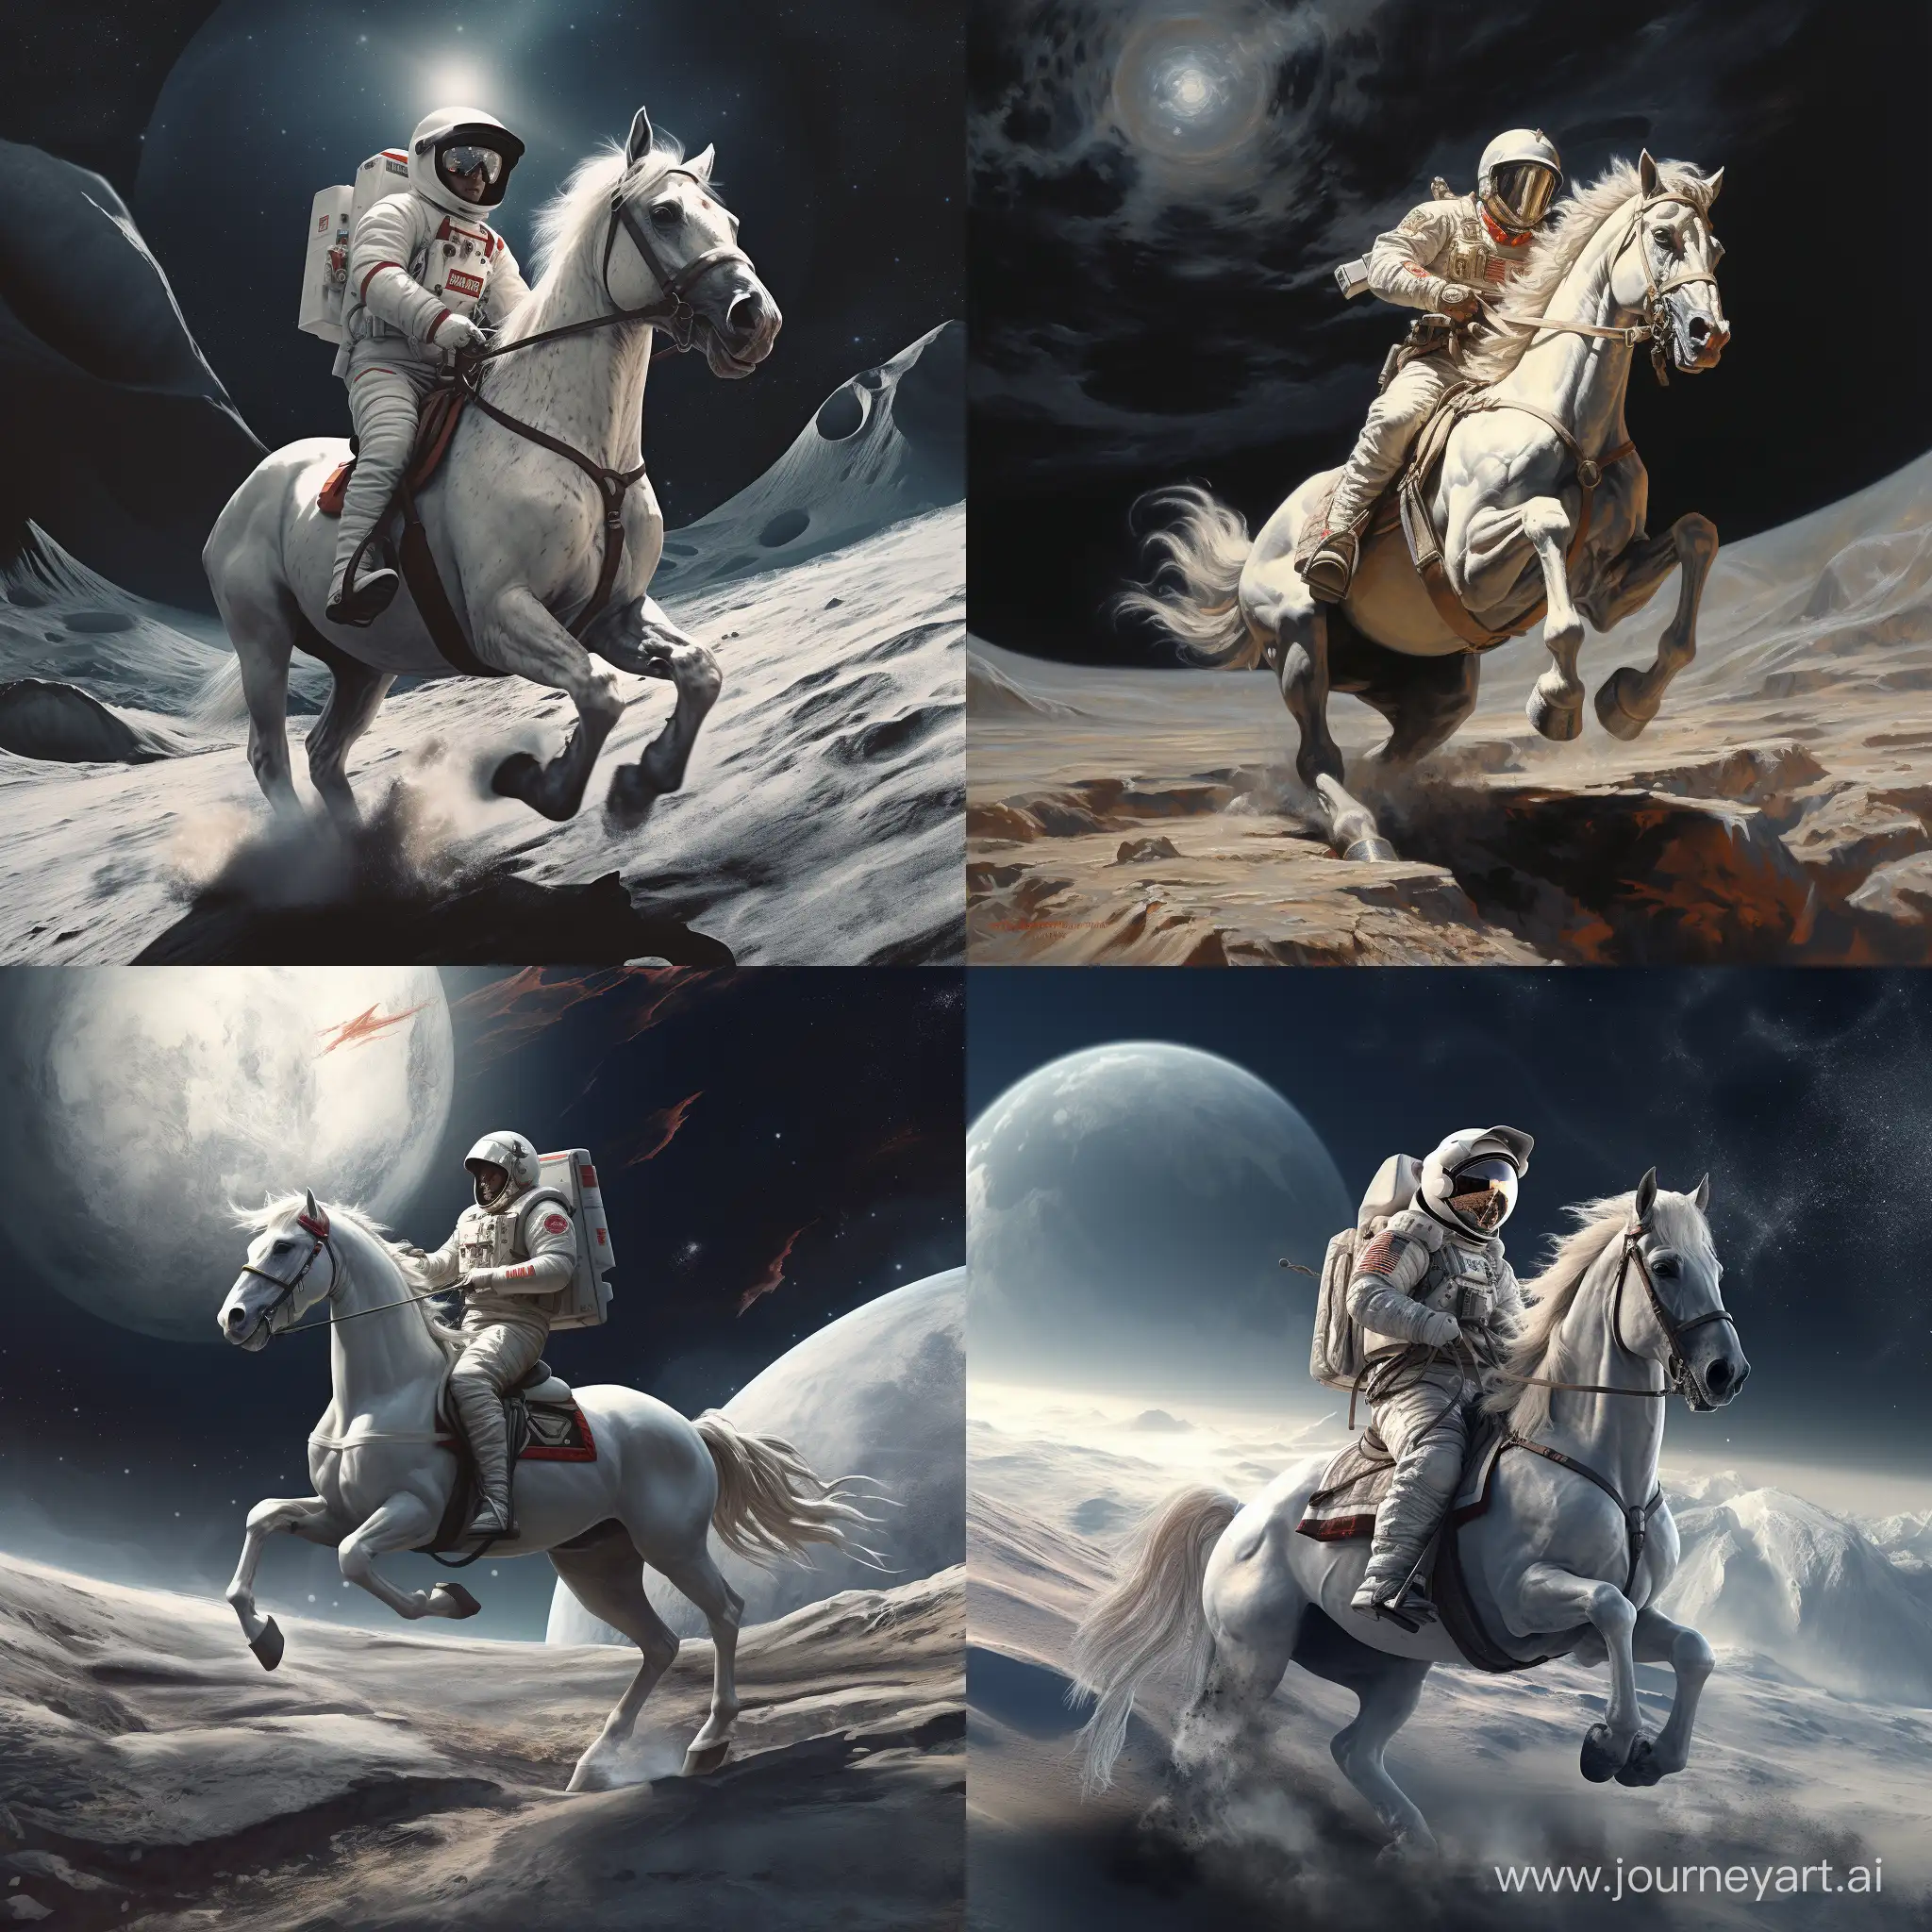 Astronaut-Riding-White-Horse-on-Moons-Surface